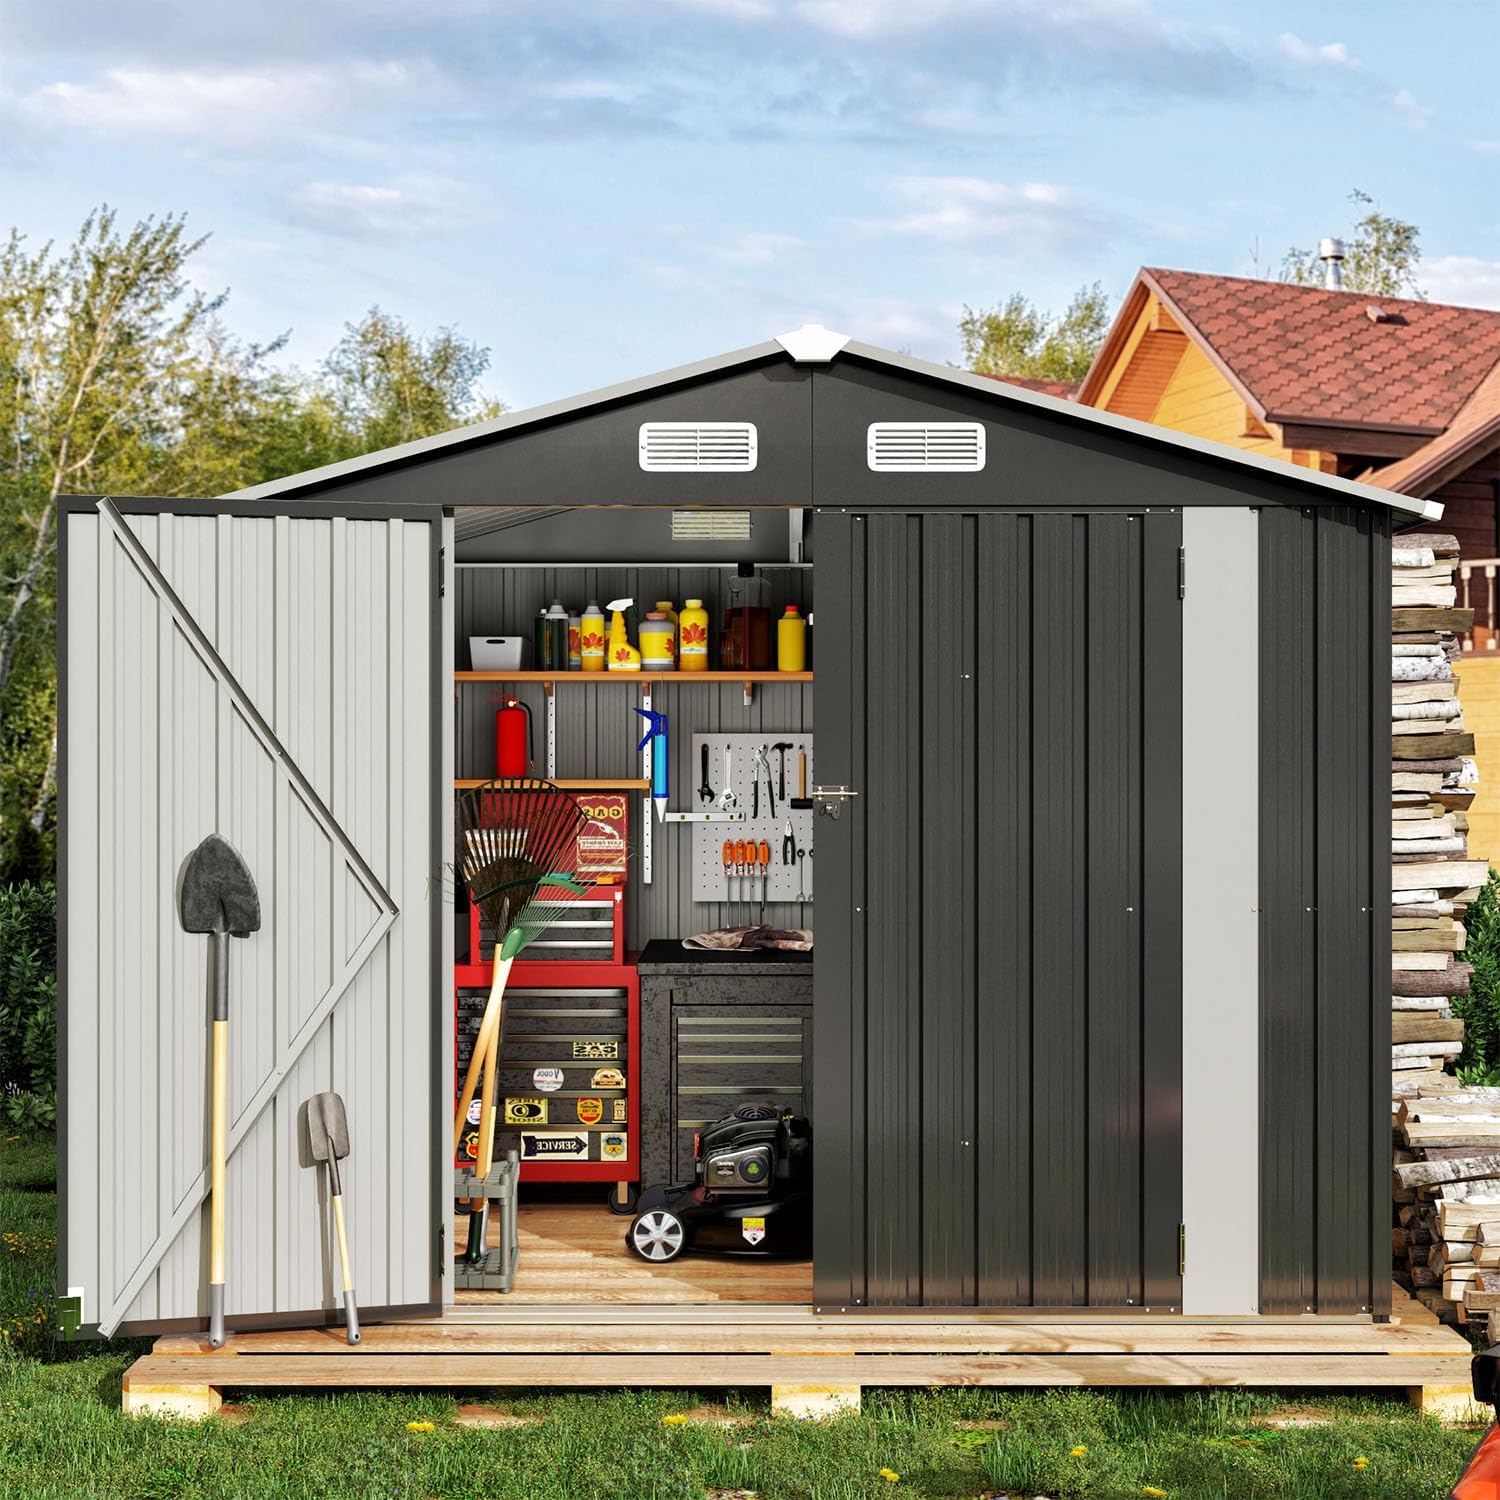 7.8 x 5.8 FT Metal Utility Tool Shed, Steel Storage Shed with Air Vent & Lockable Doors, Grey / Black